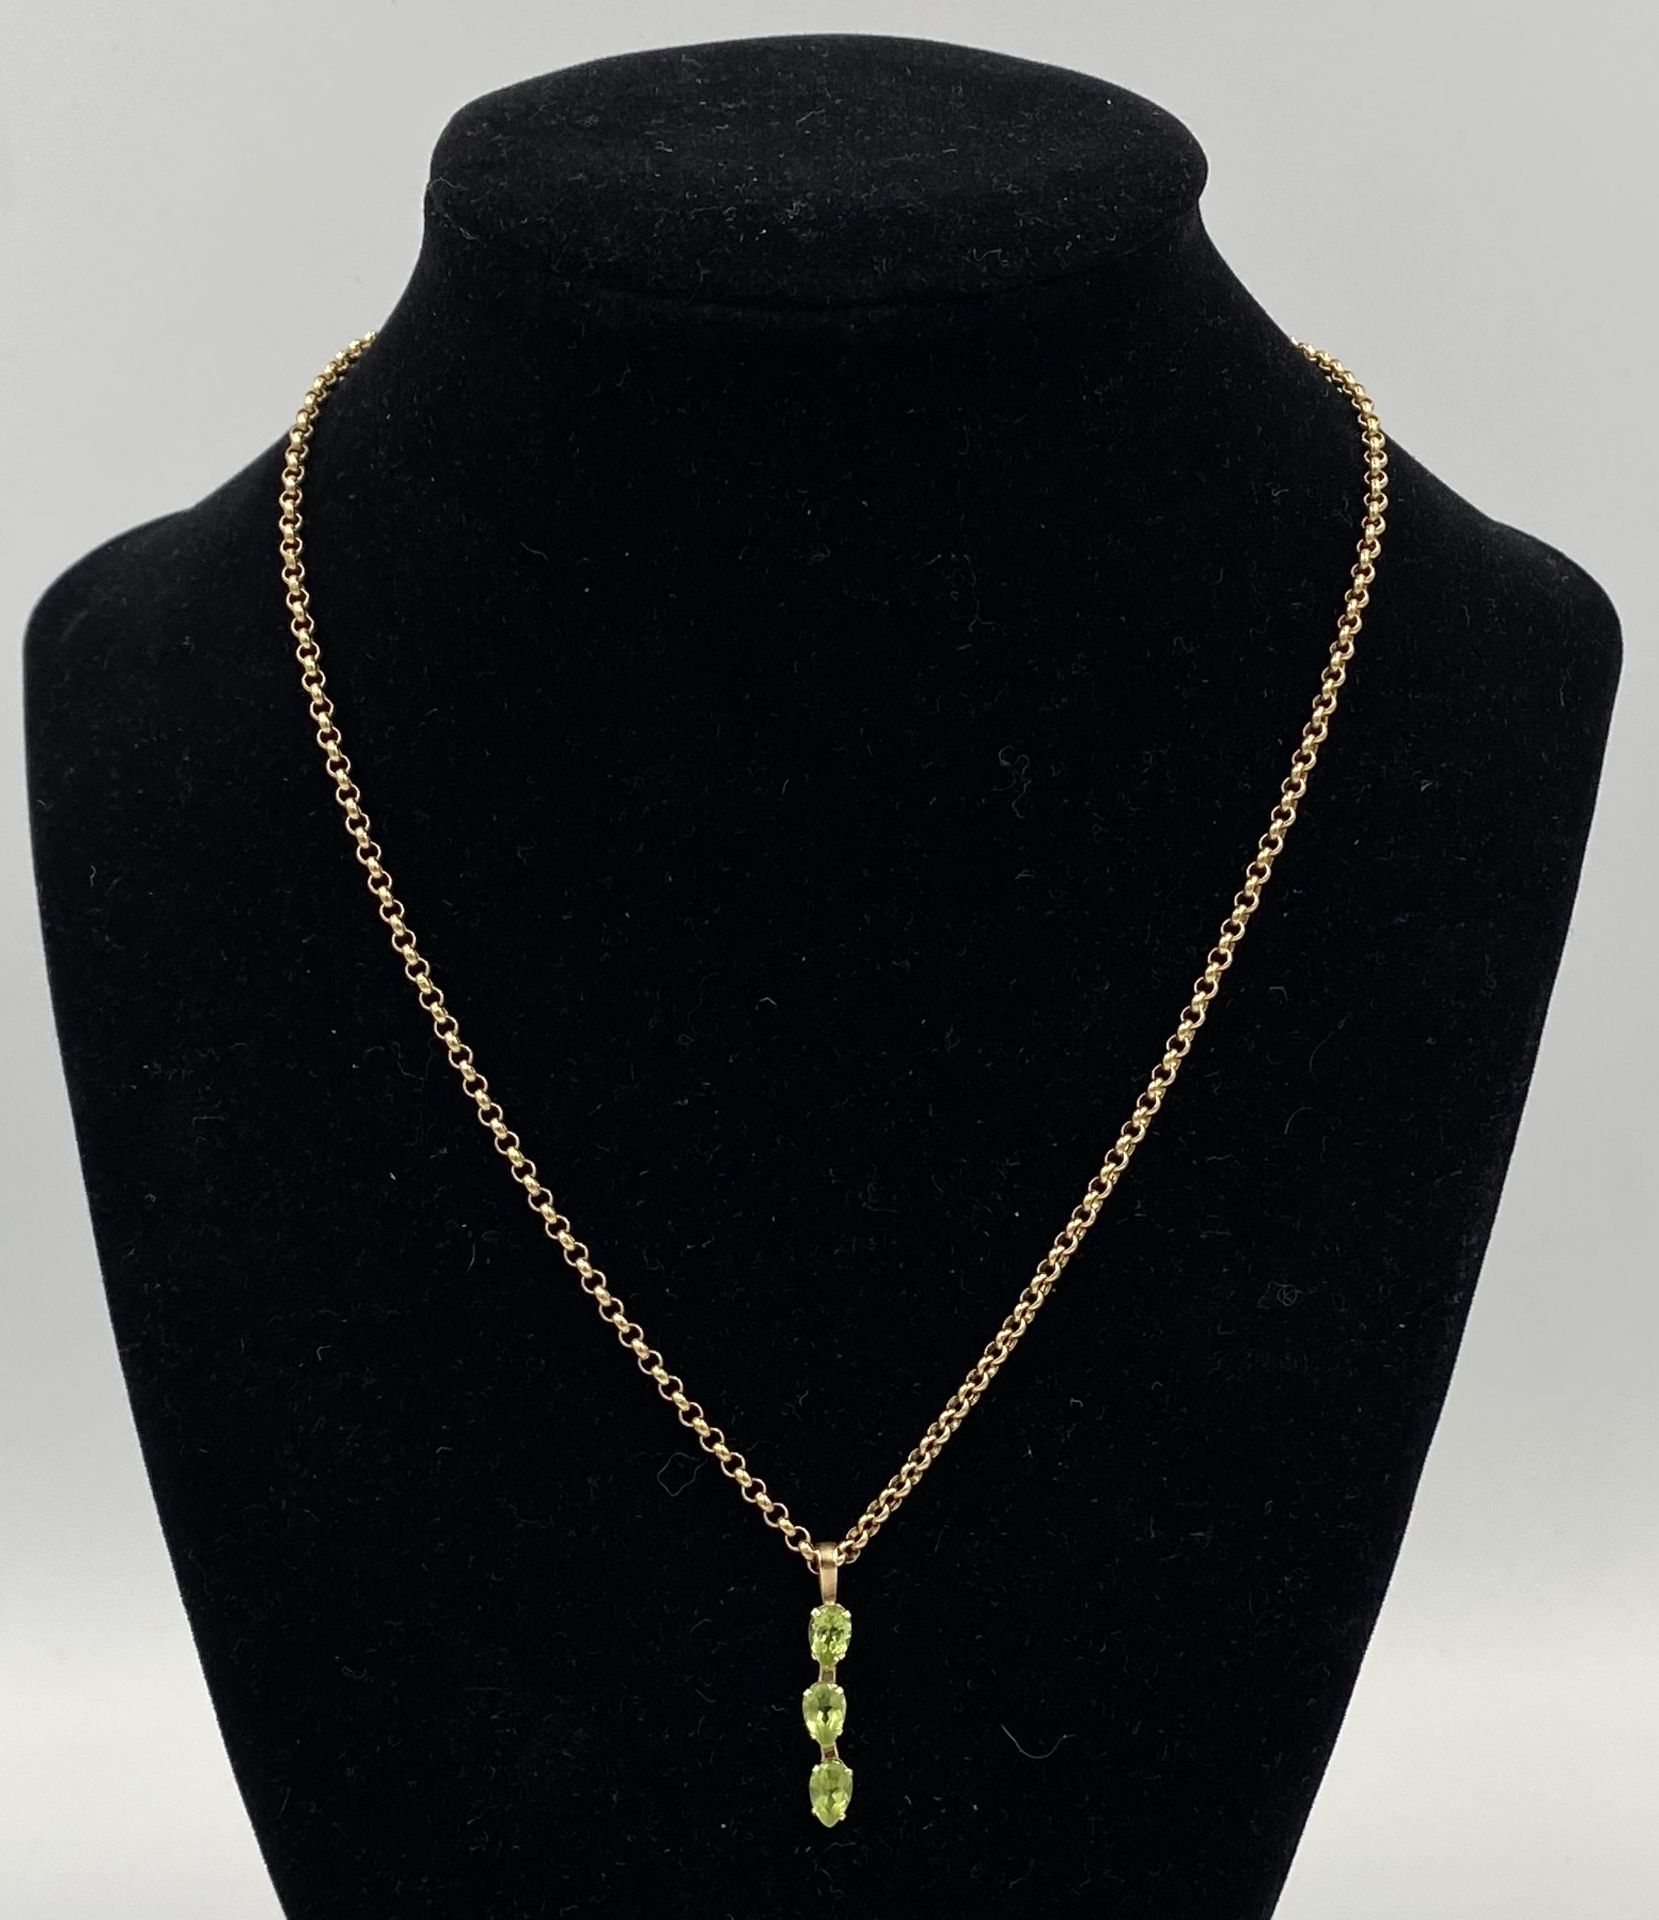 9ct gold chain with yellow metal and green stone pendant